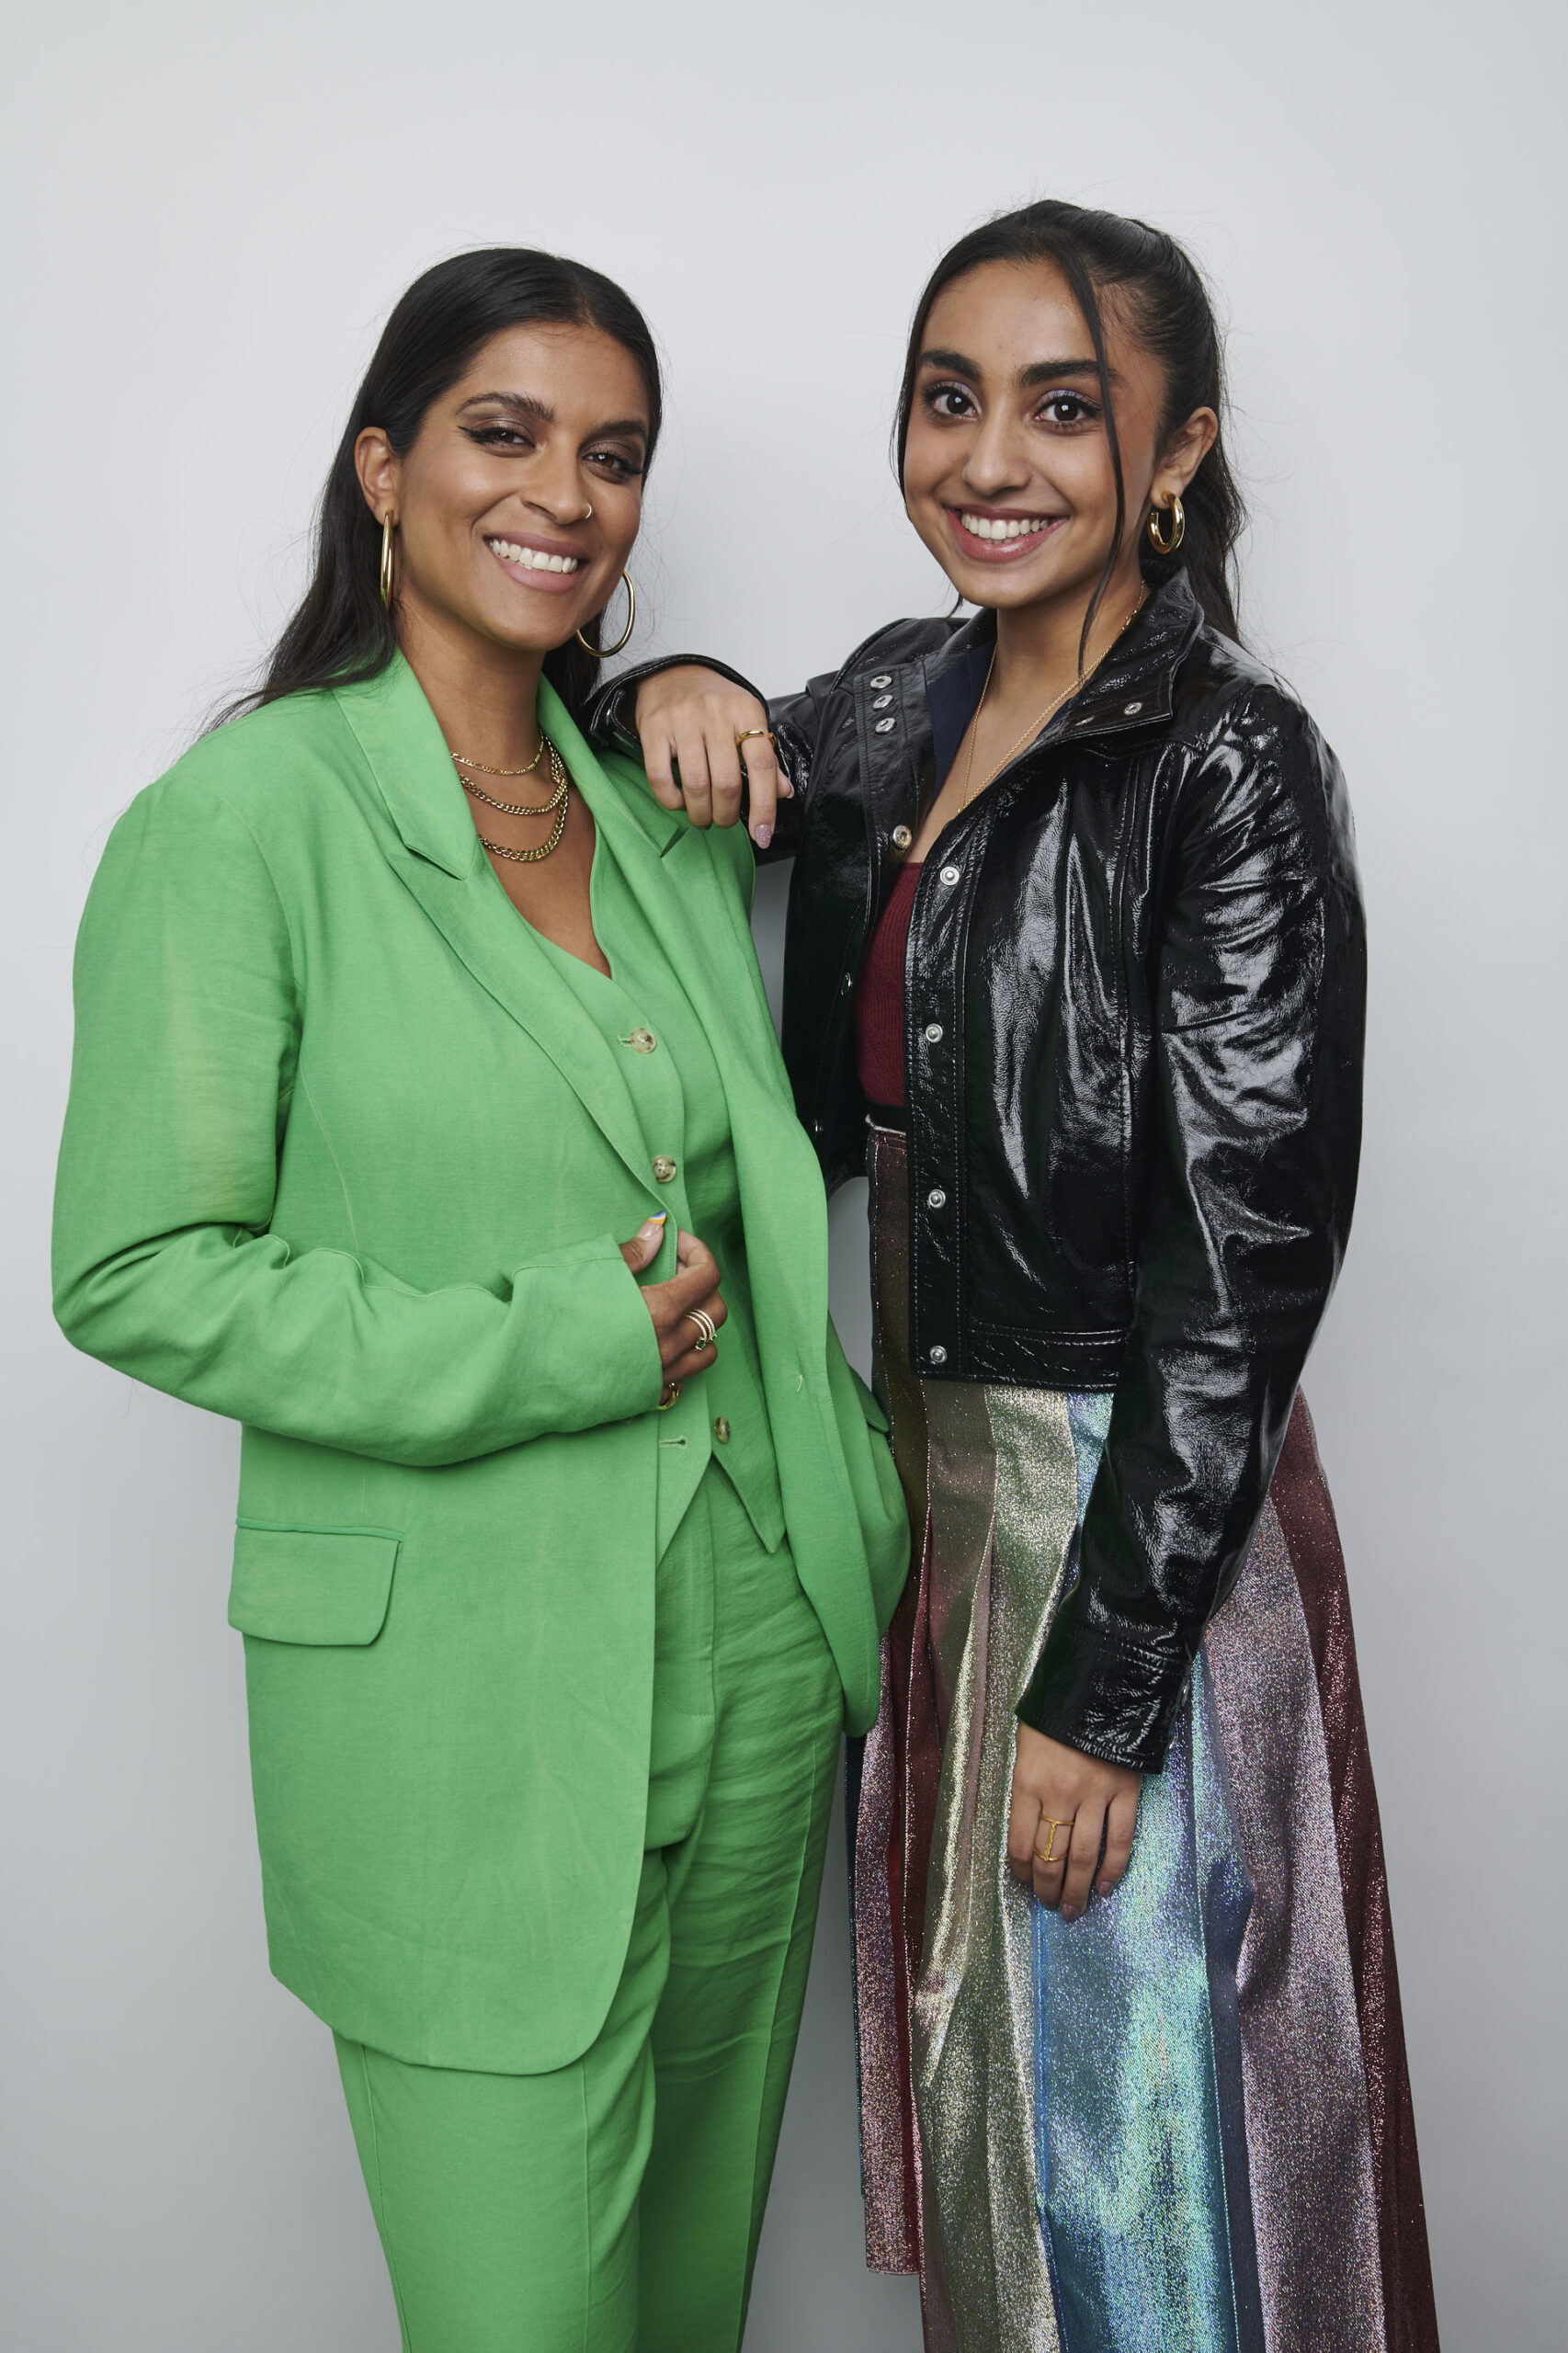 'The Muppets Mayhem' stars Lilly Singh and Saara Chaudry at New York Comic Con